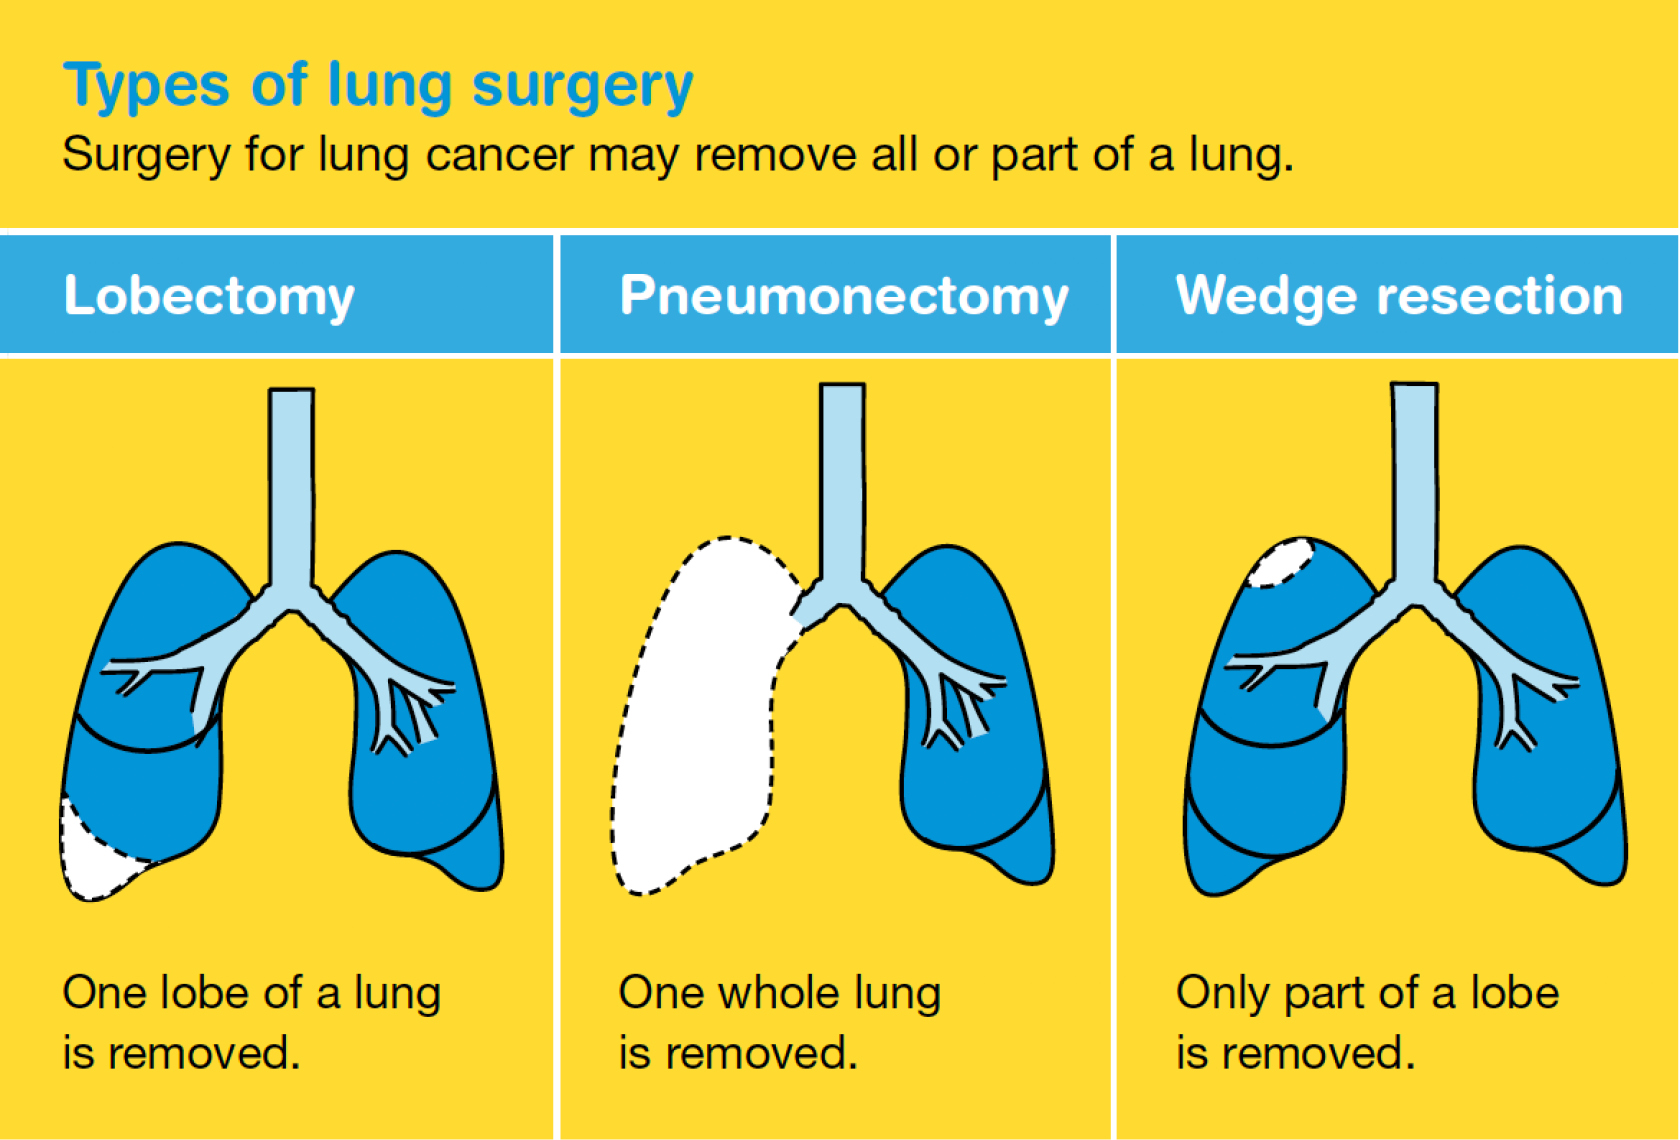 Surgery as a treatment for lung cancer